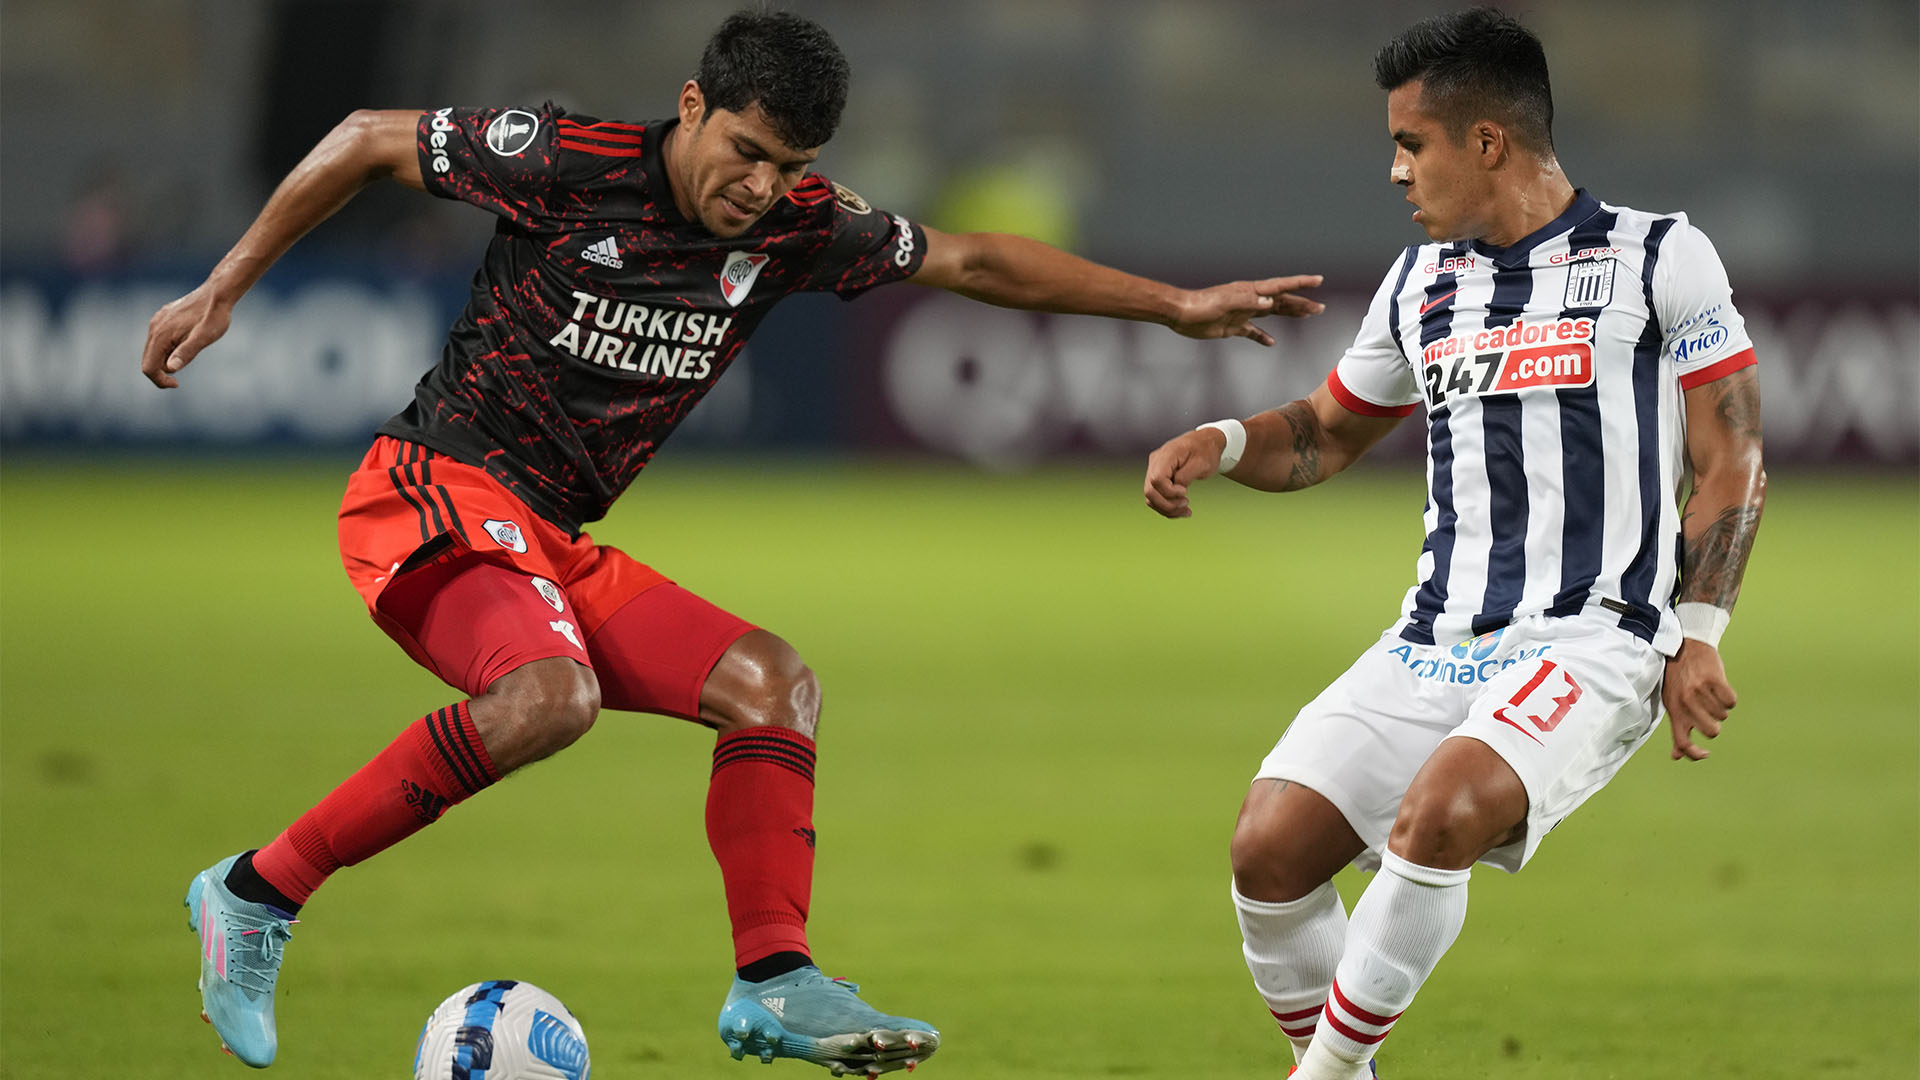 Robert Rojas In A Match Against Alianza Lima For The Copa Libertadores, The Day He Suffered An Injury (Ap Photo/Martin Mejia)